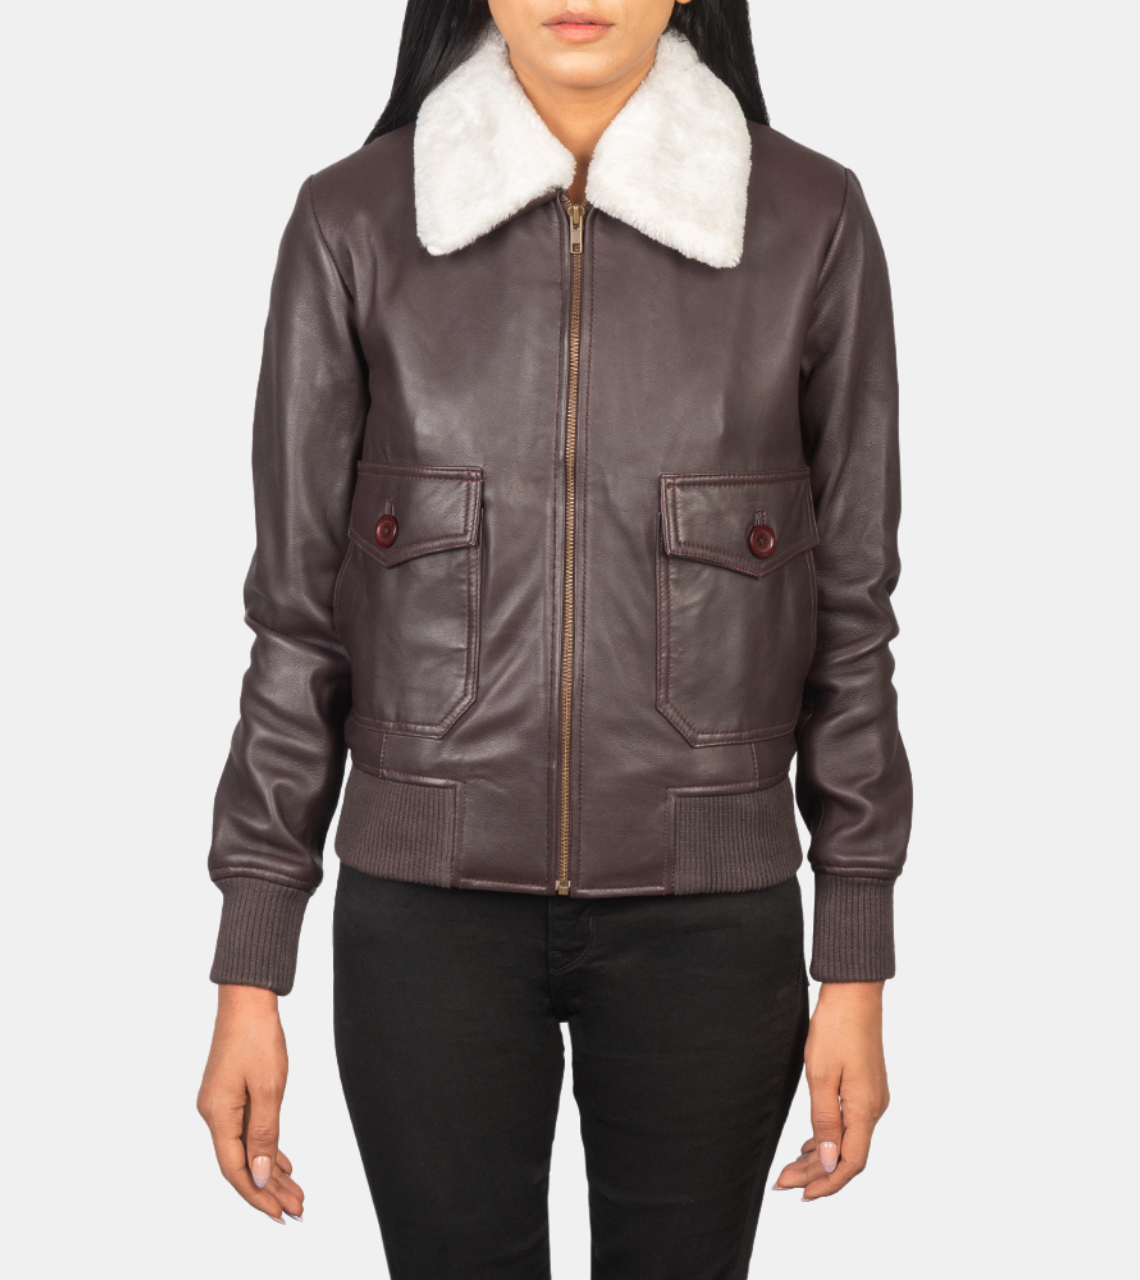  Auedriel Women's Brown Bomber Shearling Leather Jacket 